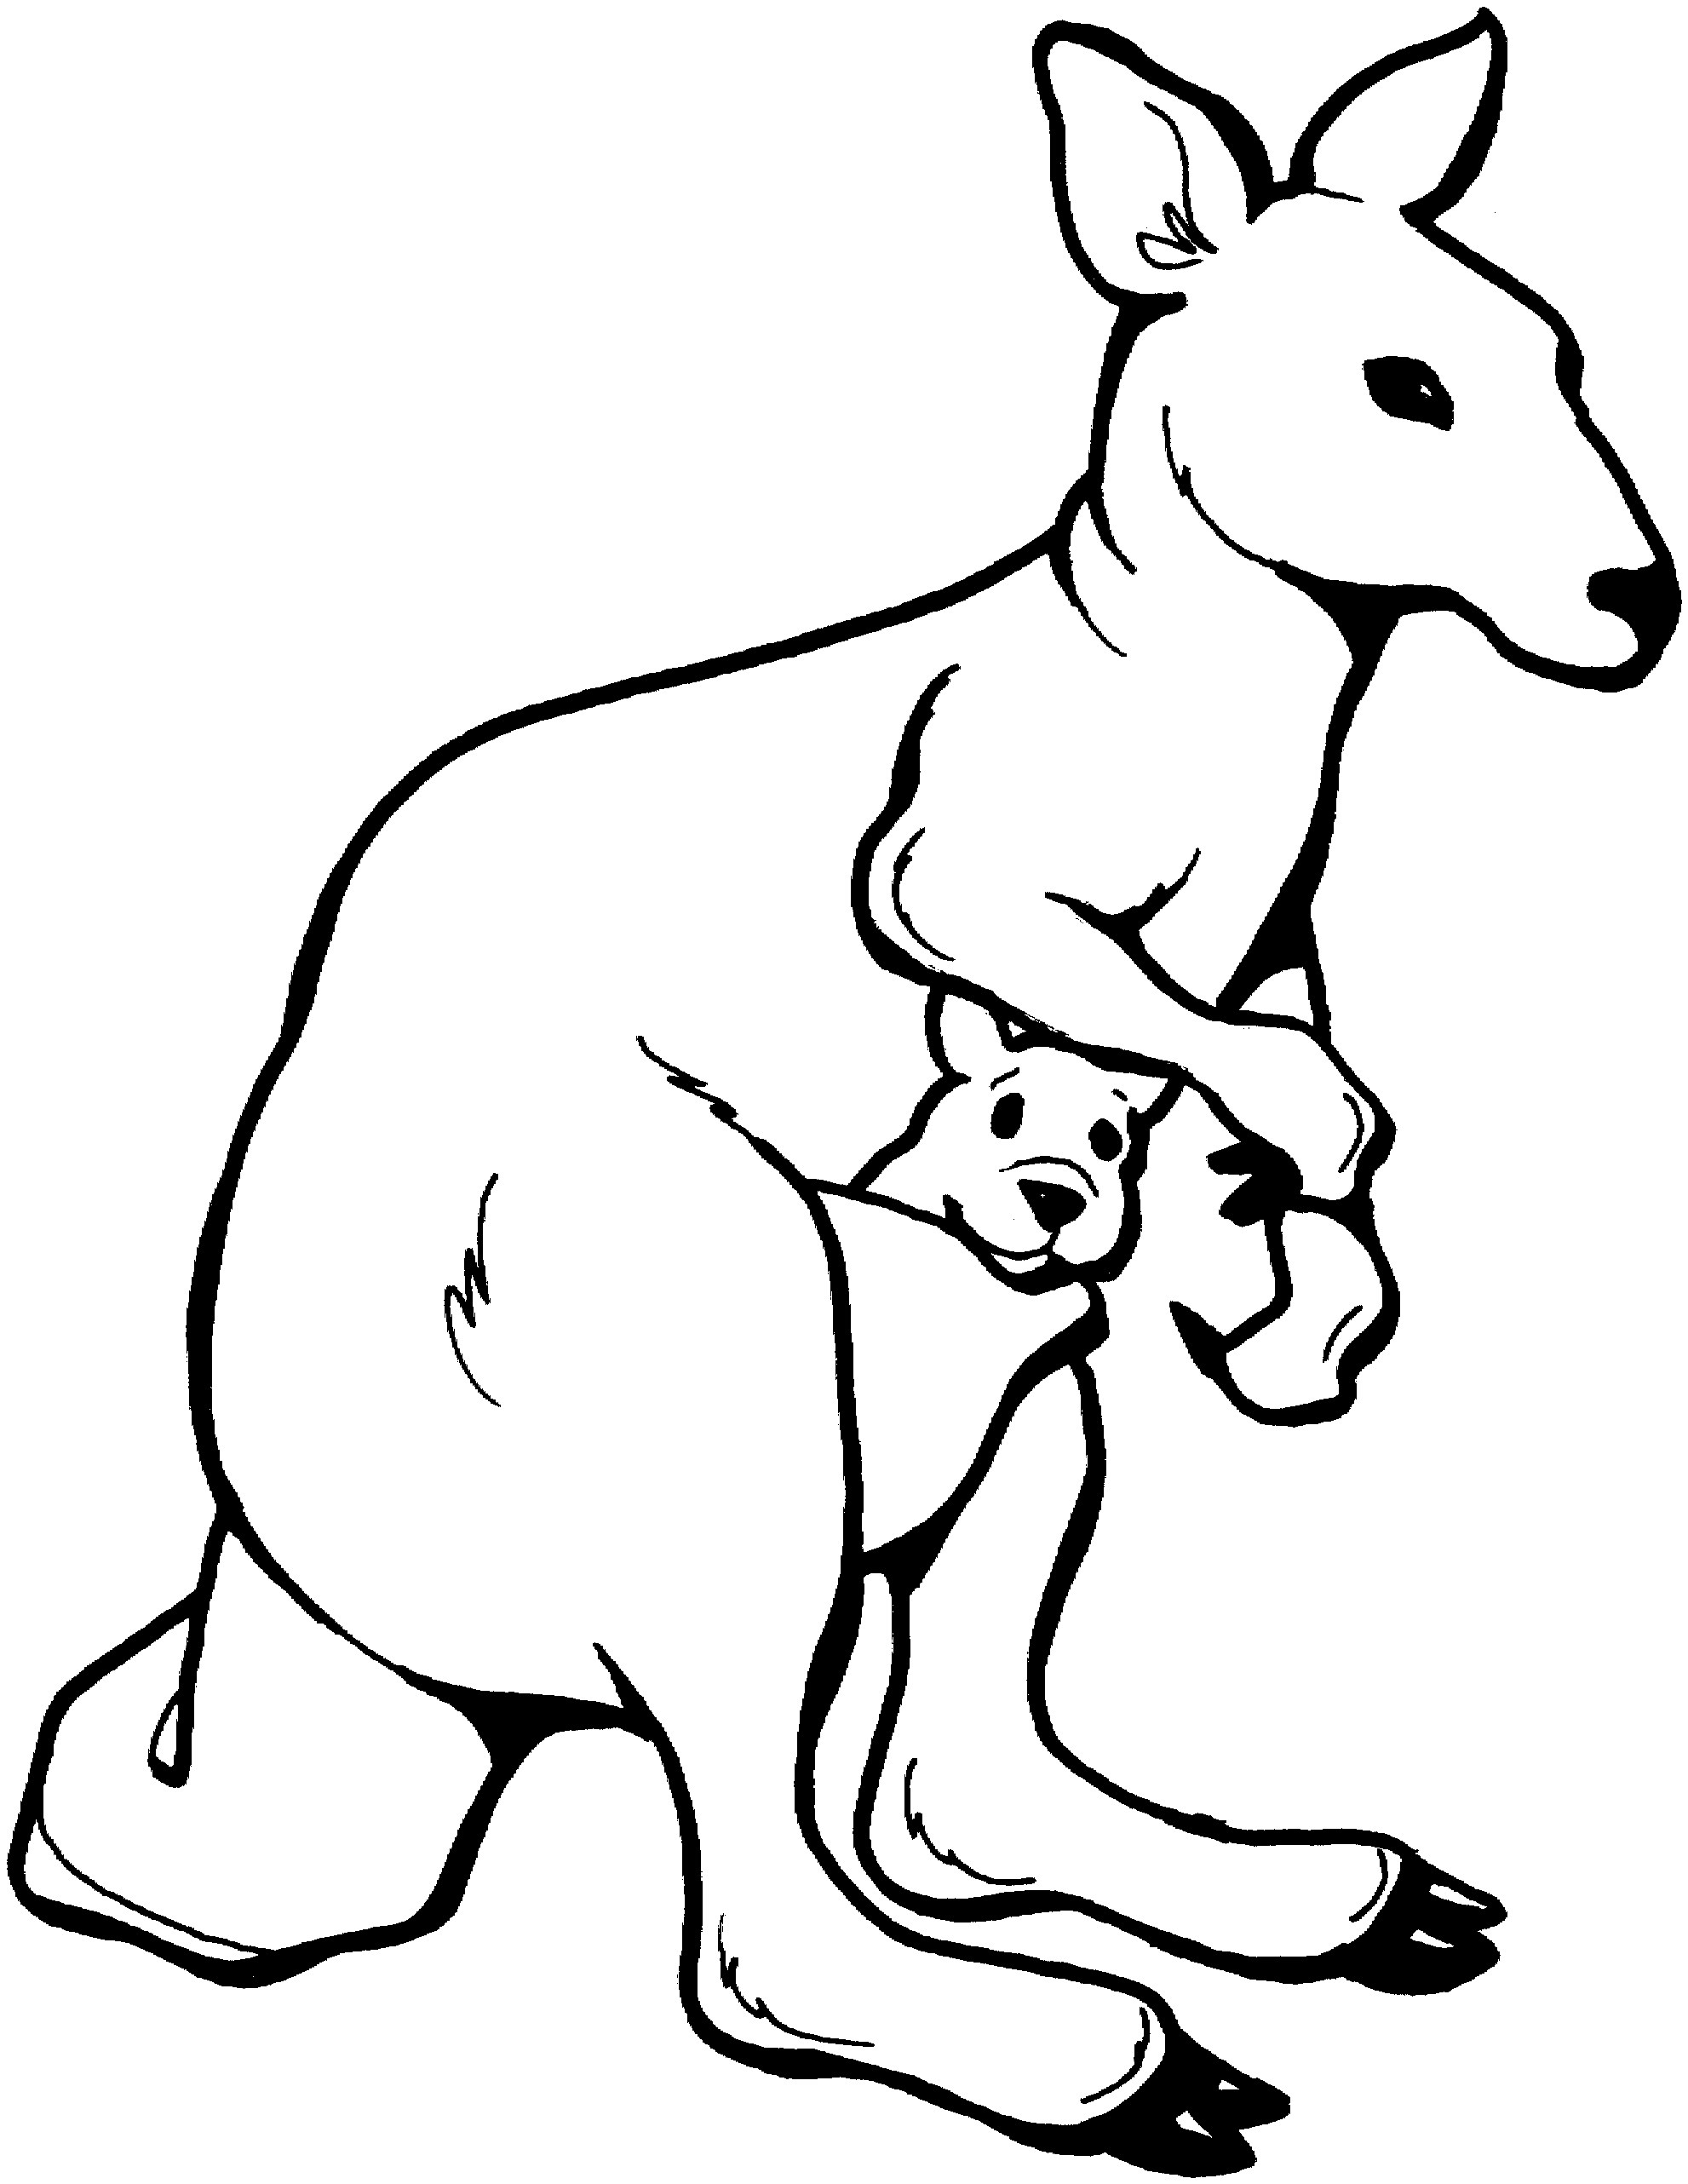 Kangaroo Coloring Pages | Clipart library - Free Clipart Images